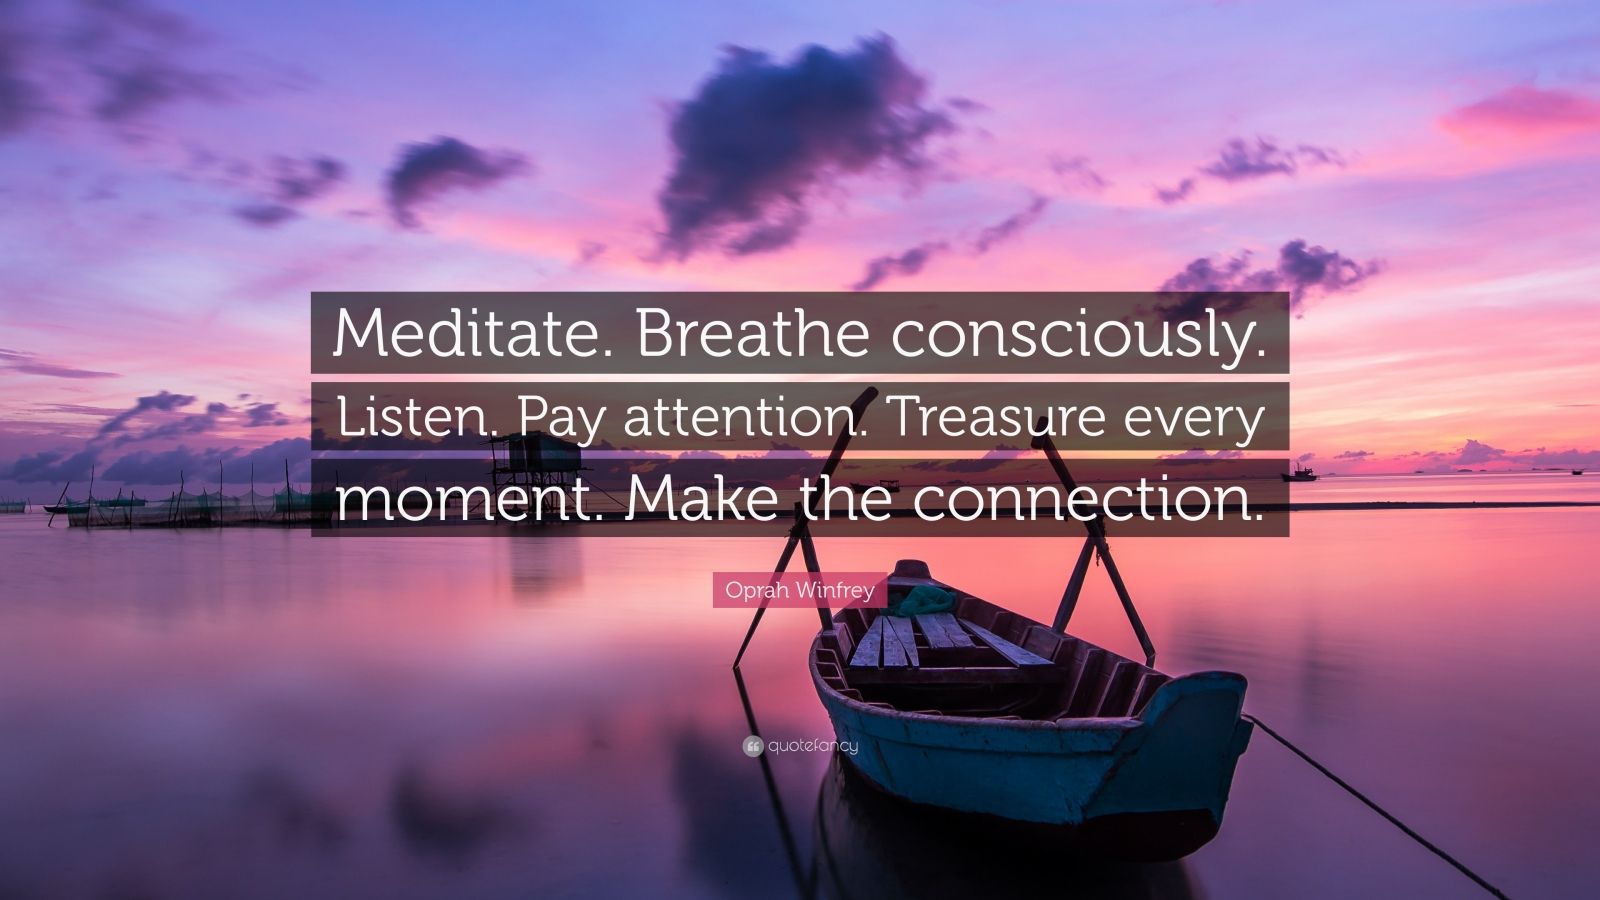 breathe consciously. listen. pay attention.